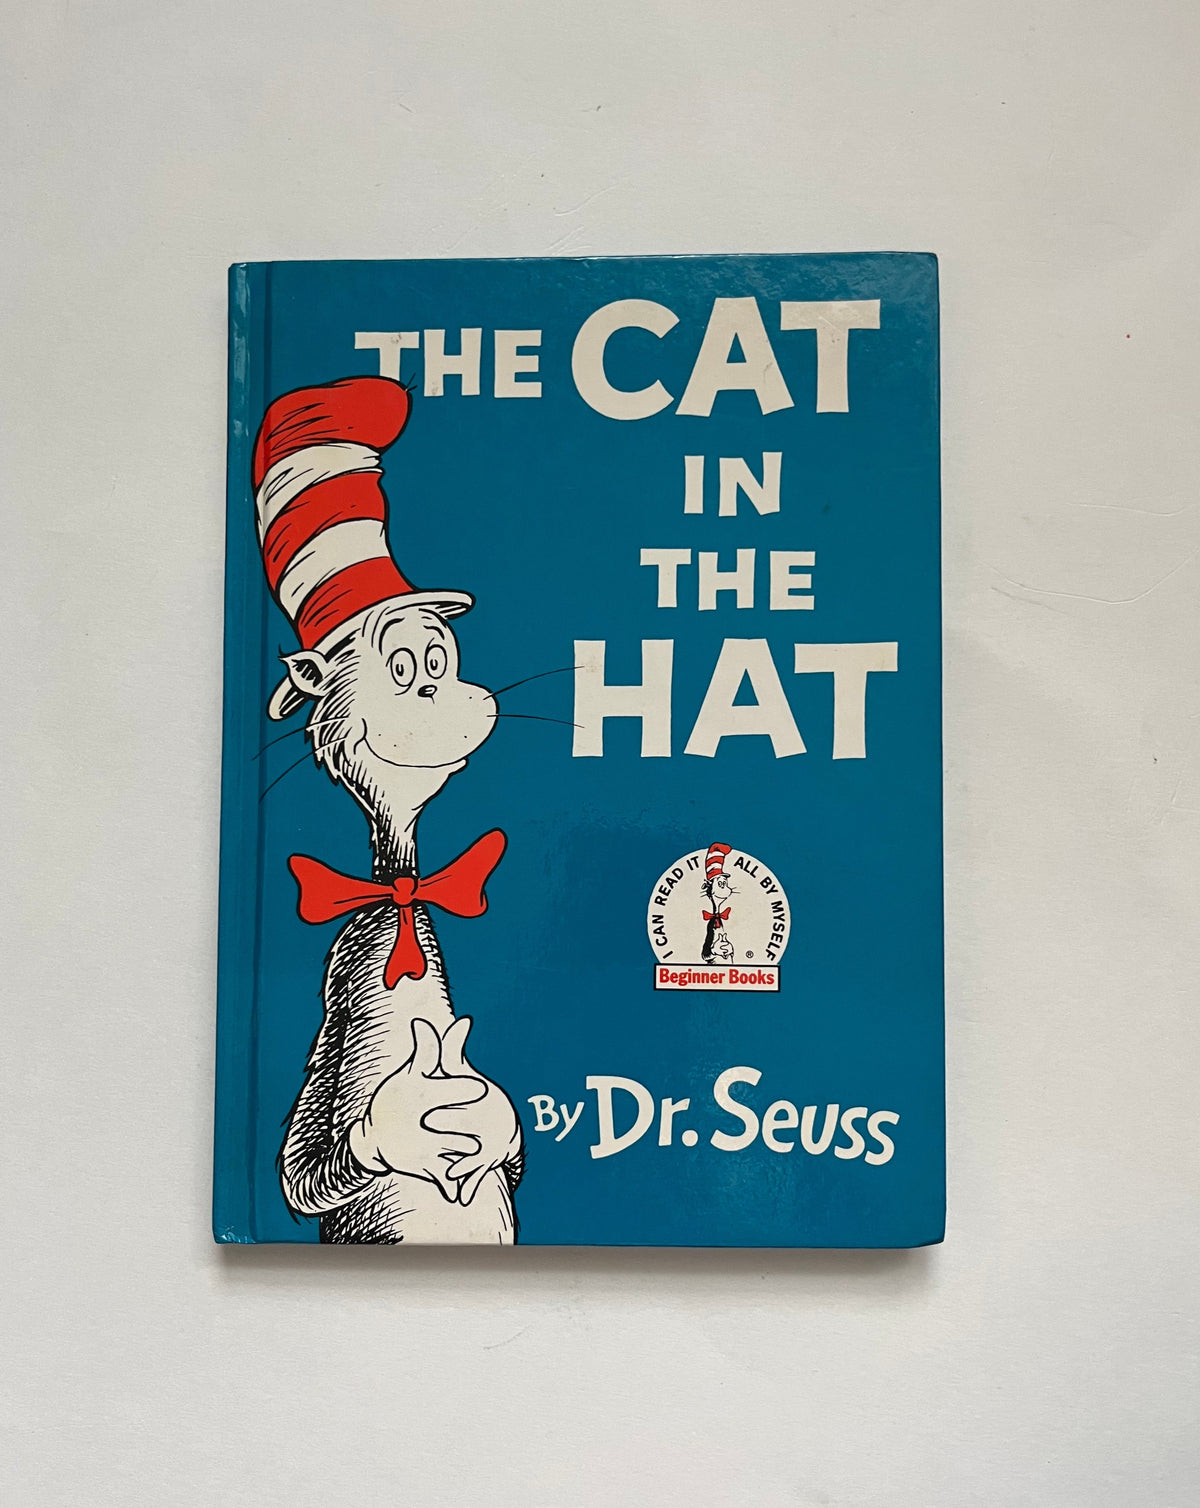 The Cat in the Hat by Dr. Seuss